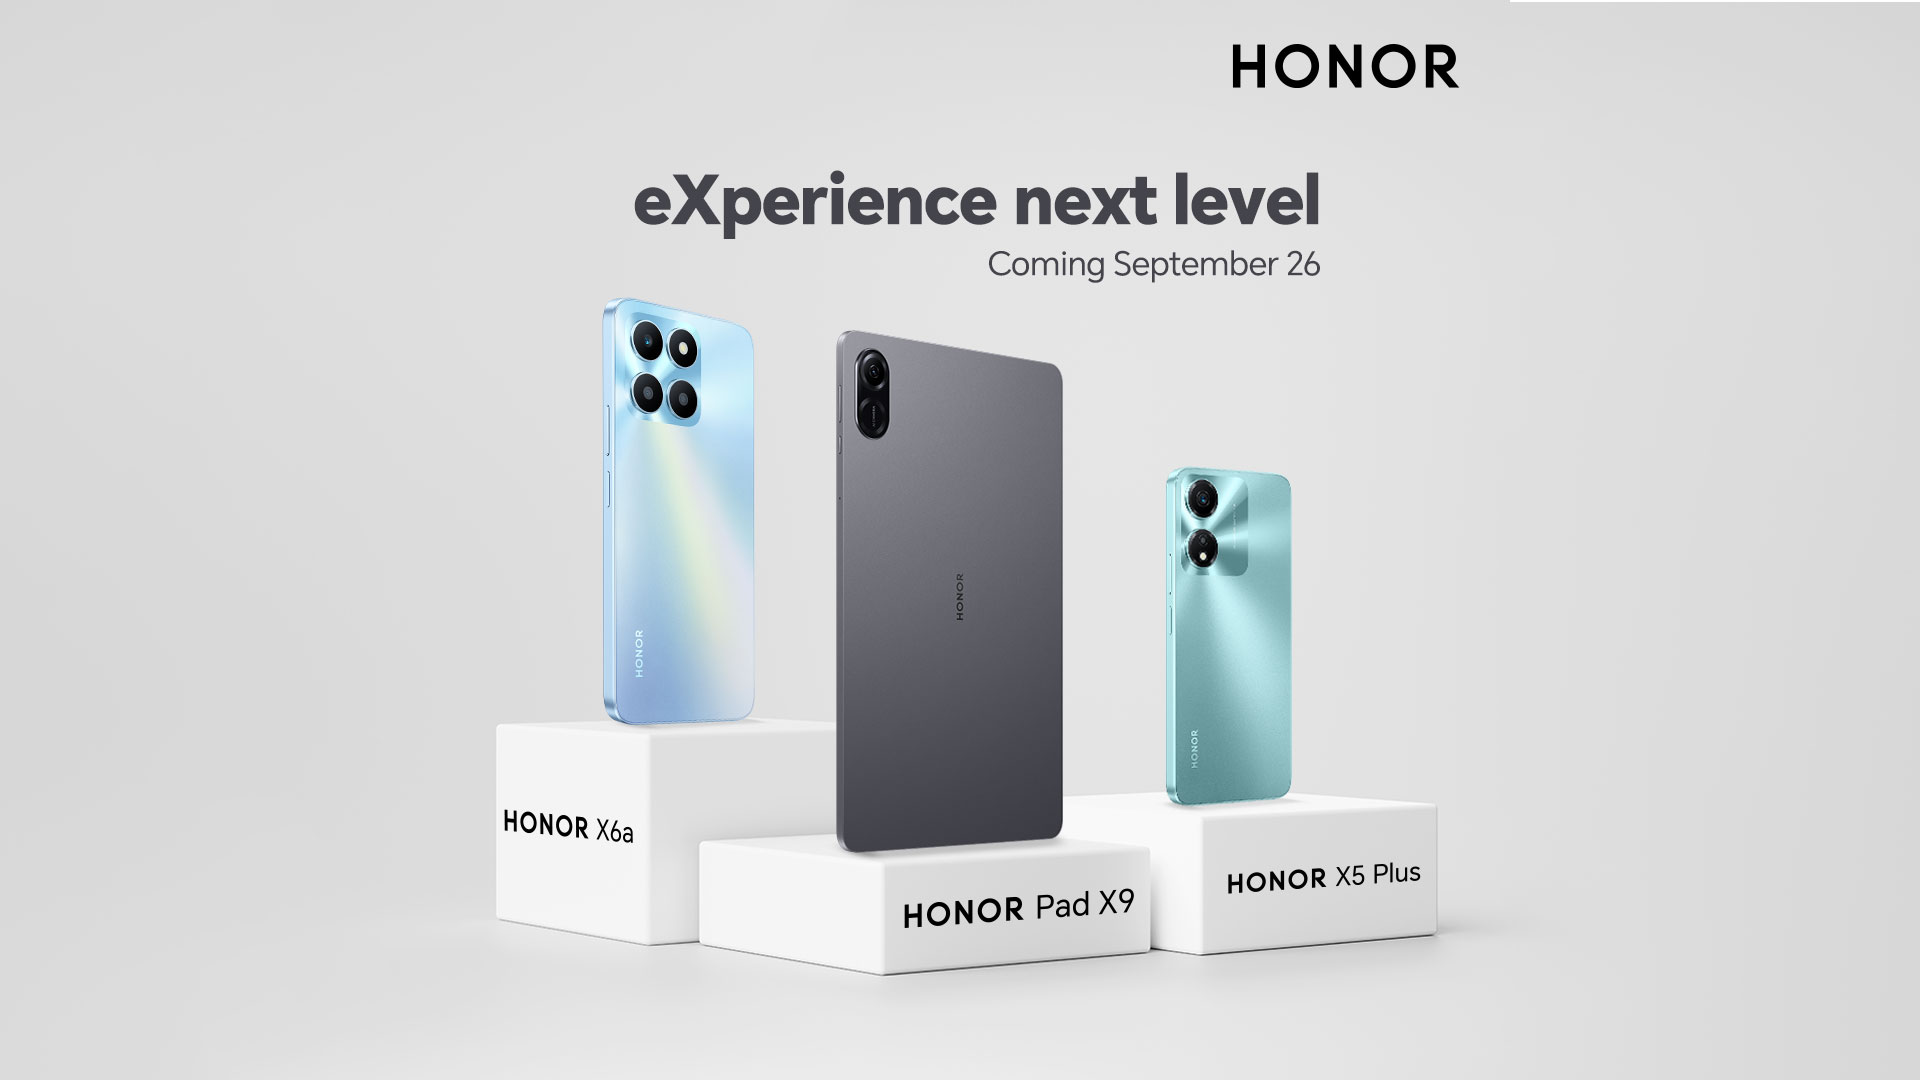 HONOR to complete 2023 X series with the affordable yet powerful HONOR X6a, X5 Plus, and Pad X9 